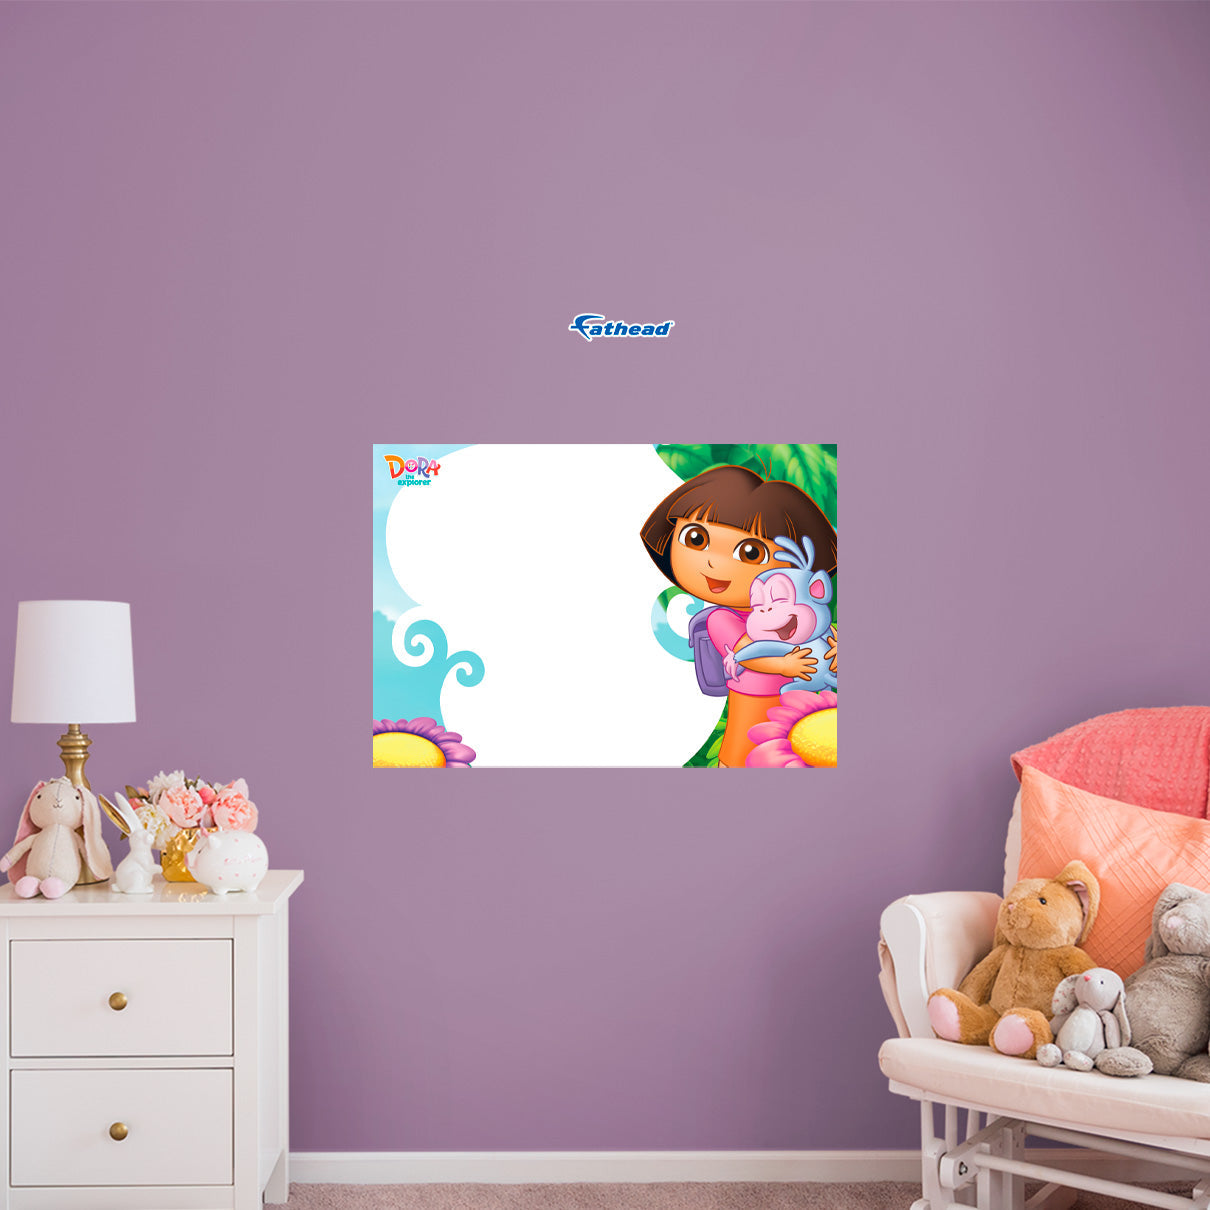 Dora the Explorer: Together Dry Erase - Officially Licensed Nickelodeon Removable Adhesive Decal